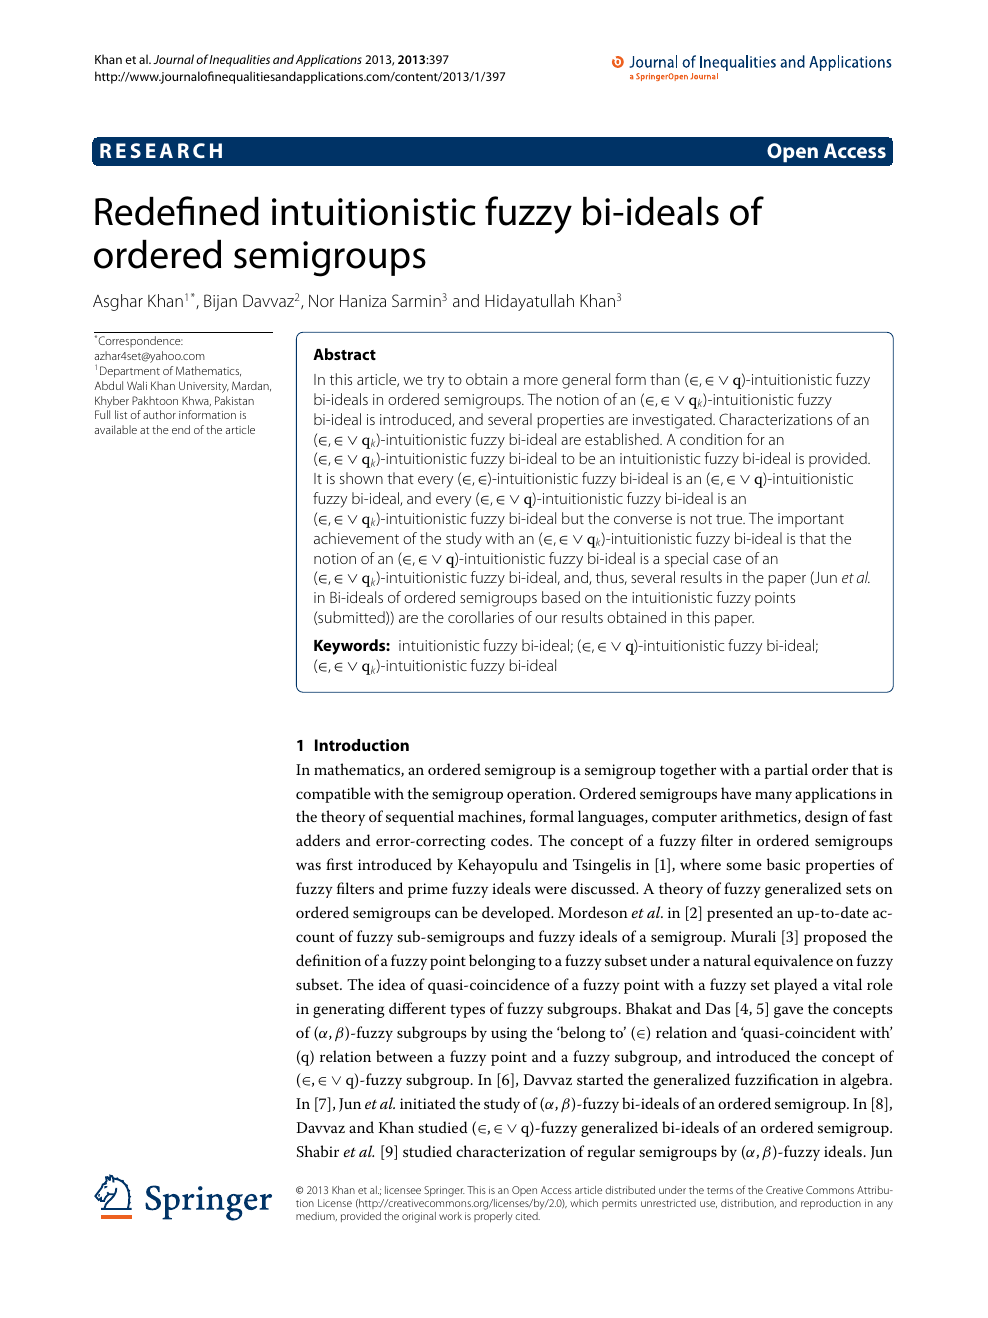 Redefined Intuitionistic Fuzzy Bi Ideals Of Ordered Semigroups Topic Of Research Paper In Mathematics Download Scholarly Article Pdf And Read For Free On Cyberleninka Open Science Hub